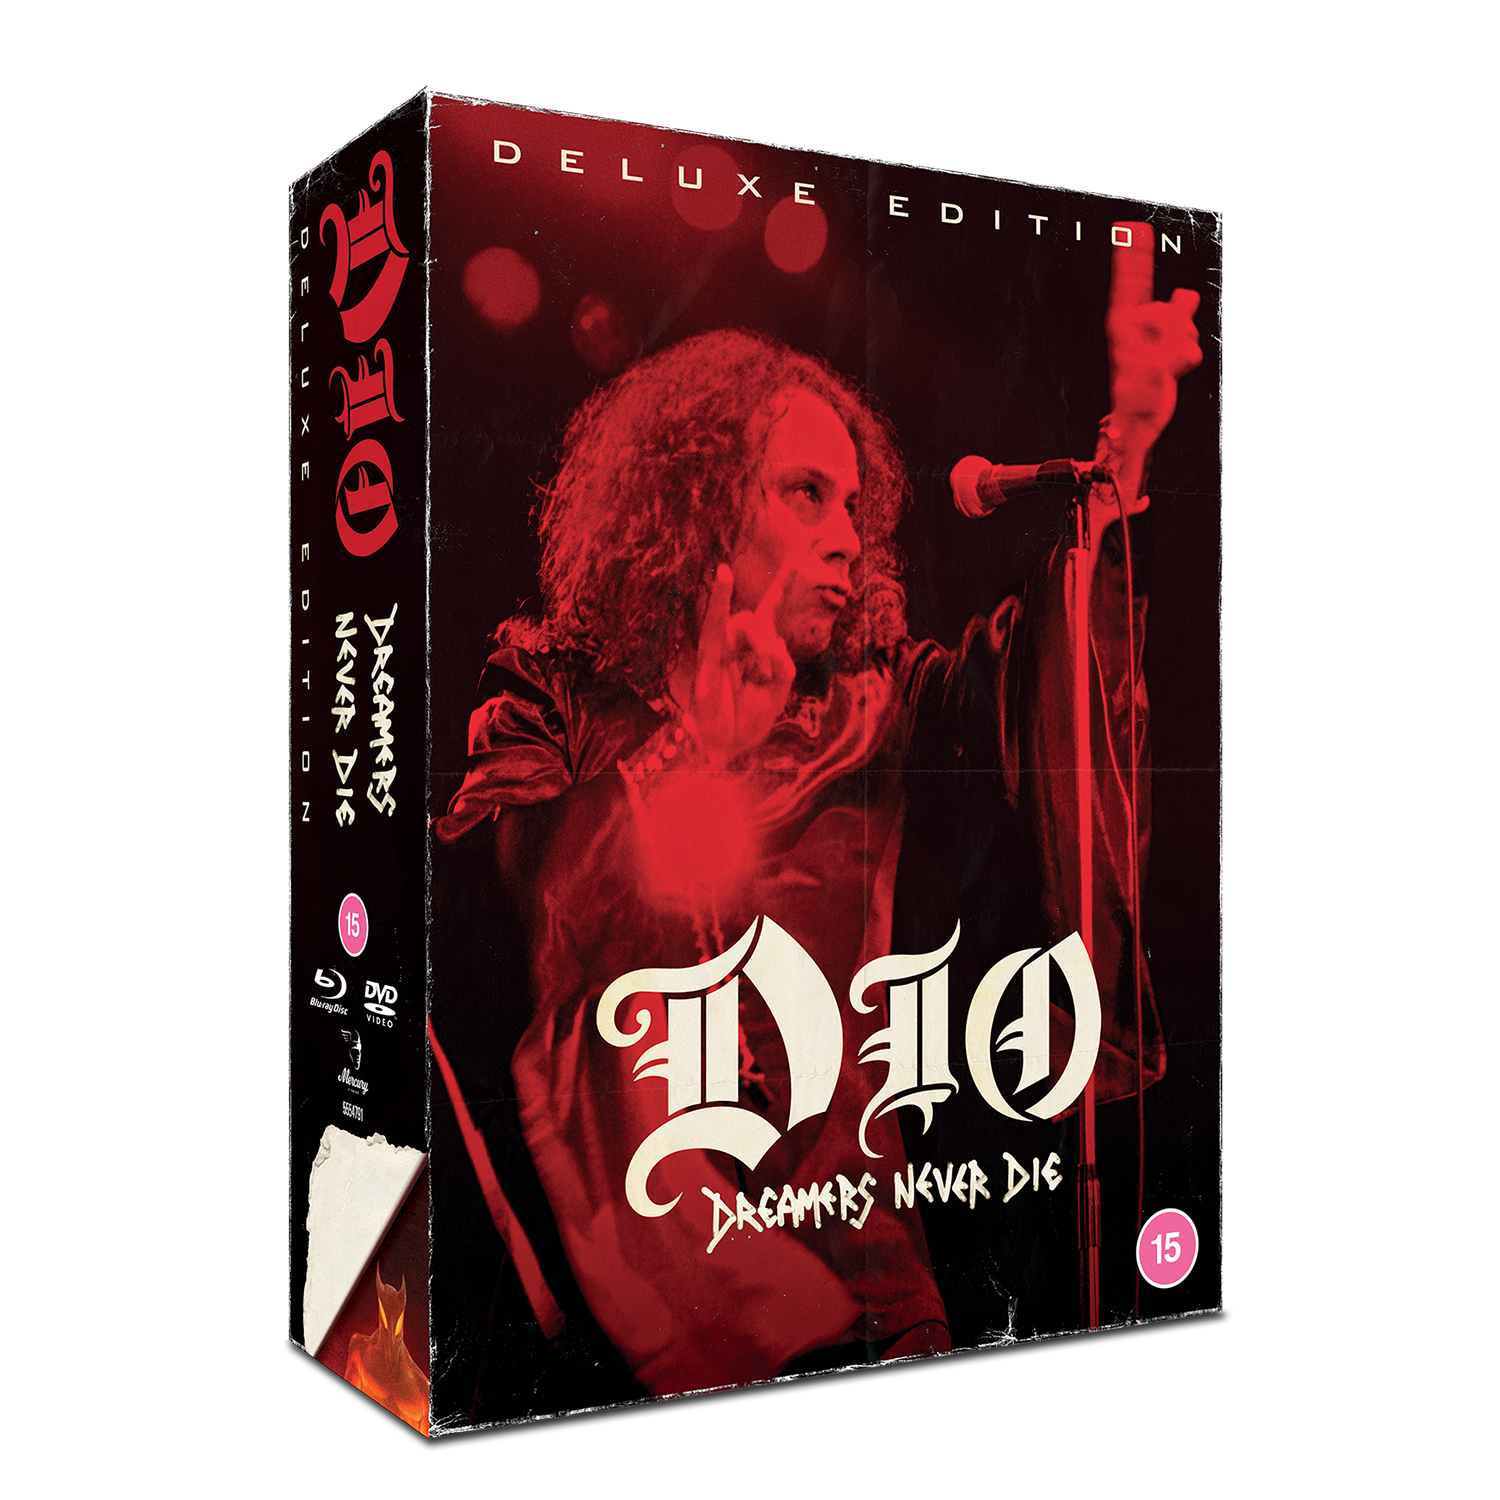 Dio - Dreamers Never Die: Limited Edition Deluxe DVD Box Set